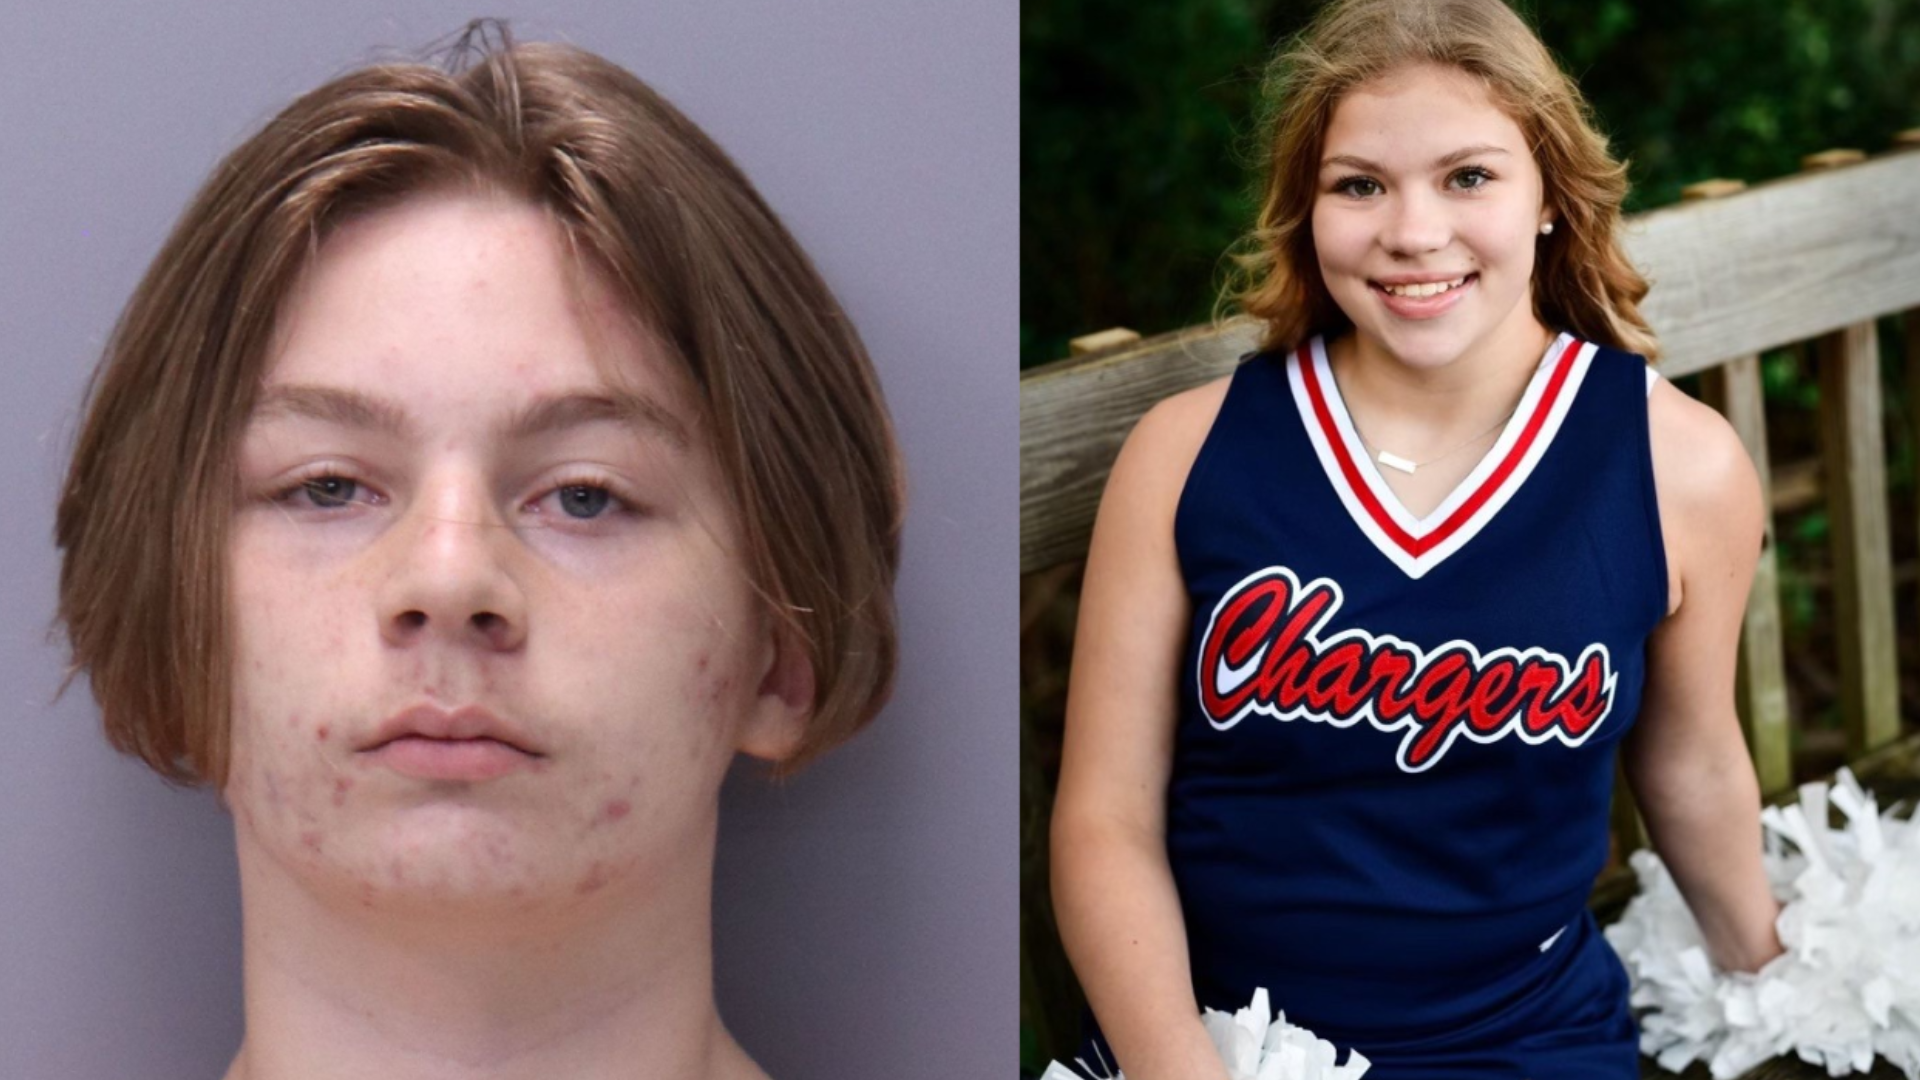 At this time, here's what we know about the timeline of 14-year-old Aiden Fucci's arrest in relation to Tristyn Bailey's death.